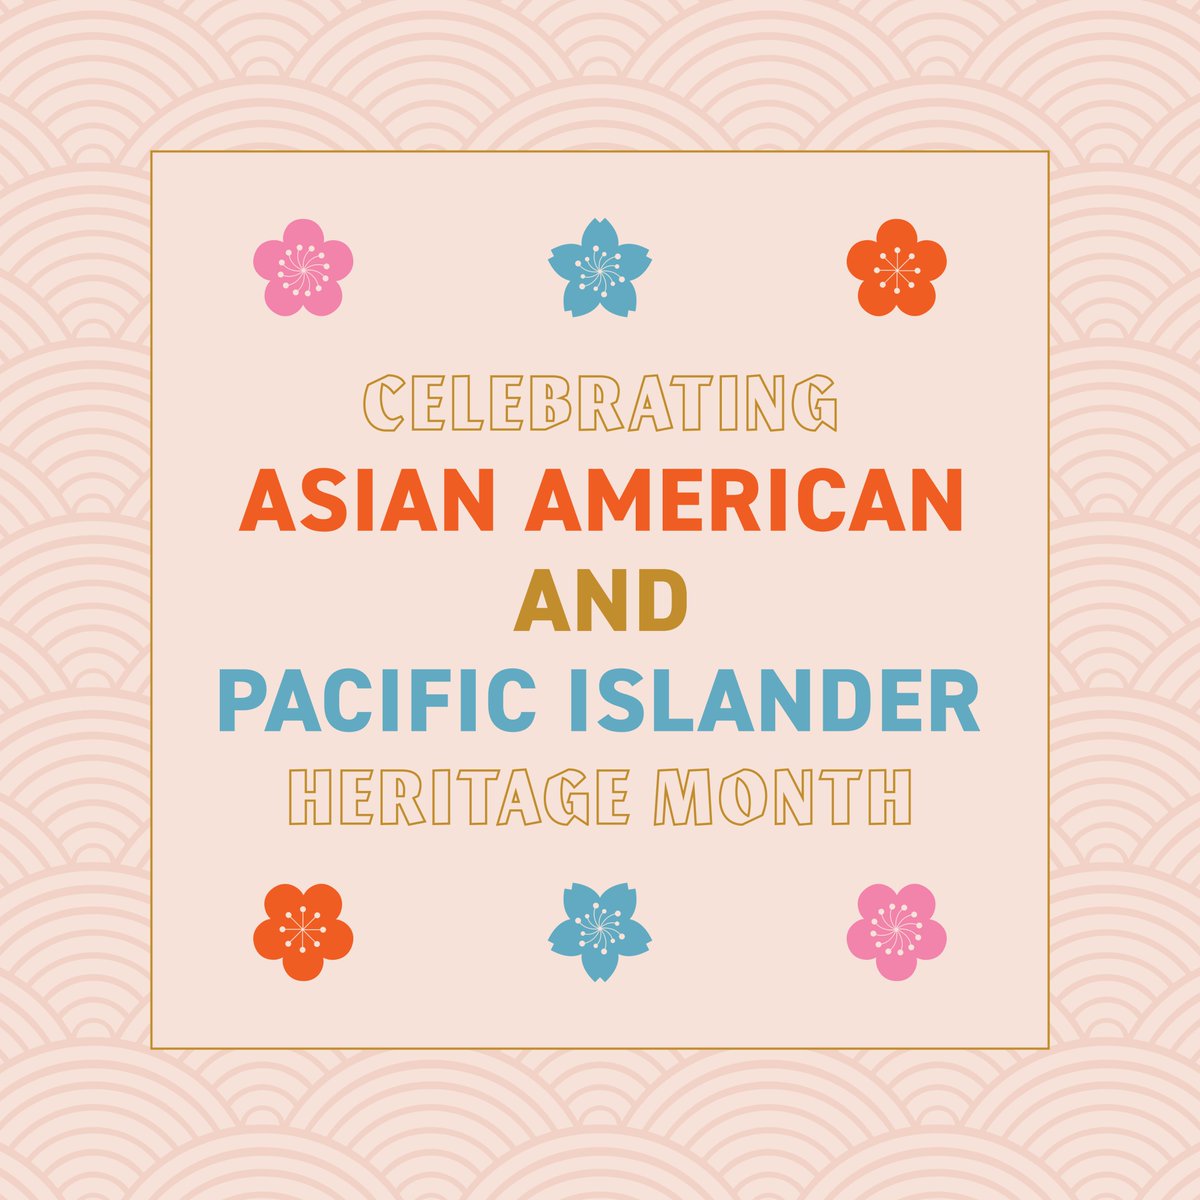 We honor Asian American Pacific Islander Month by celebrating and recognizing the historical and cultural contributions made to the United States by people of Asian and Pacific Islander descent. #AAPI #AAPIHeritageMonth